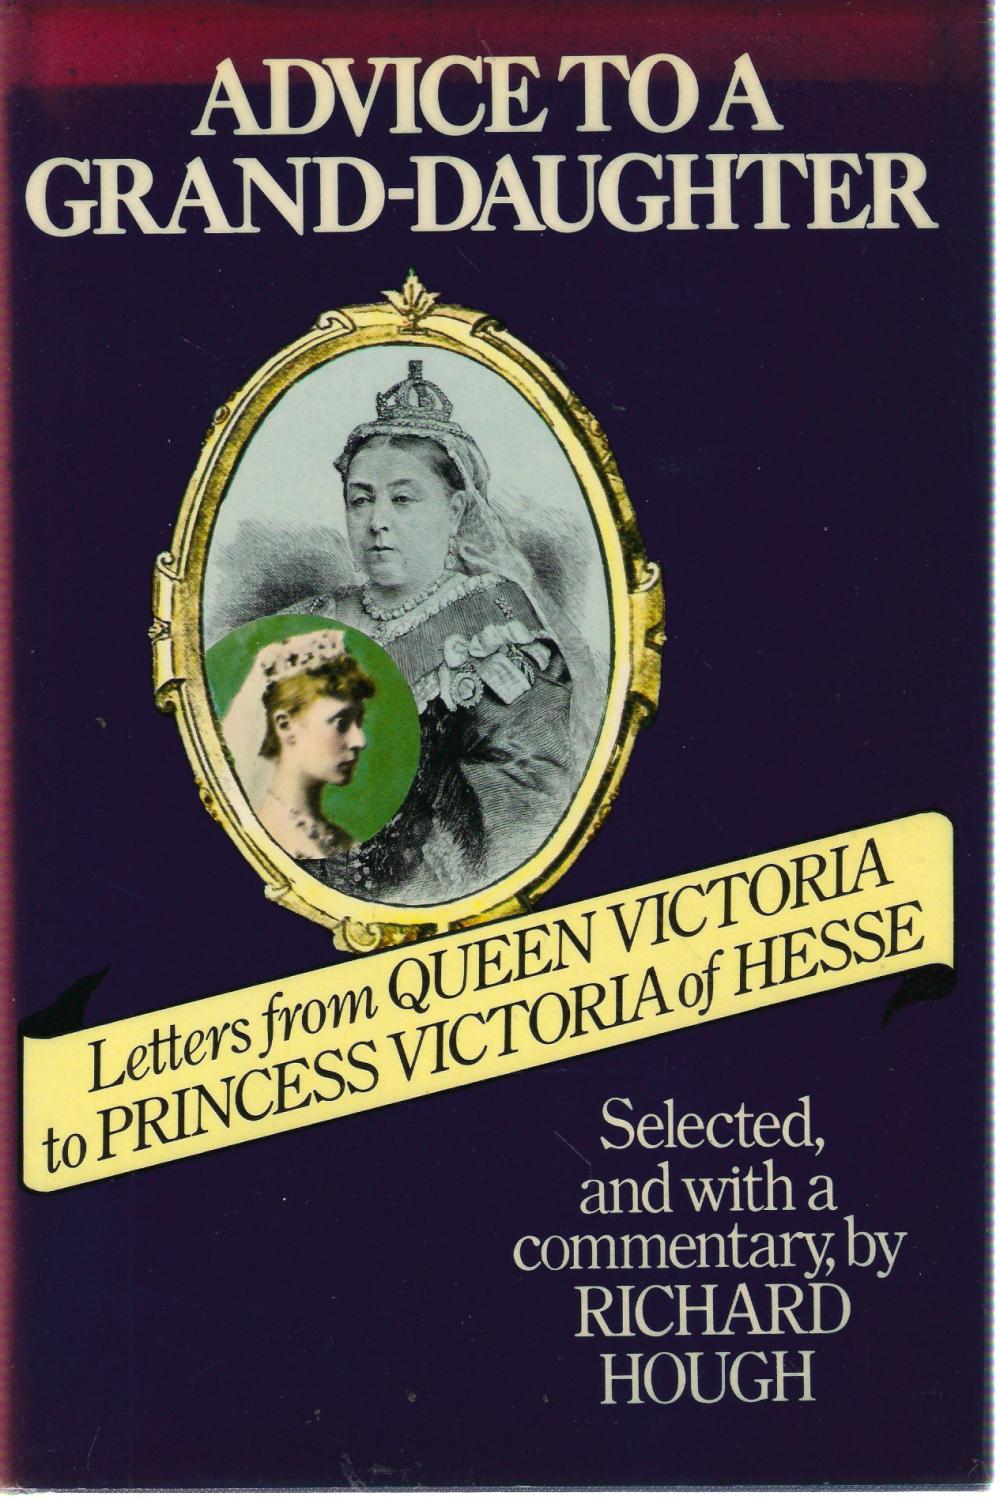 Advice to a Grand-daughter: Letters from Queen Victoria to Princess Victoria of Hesse - Victoria